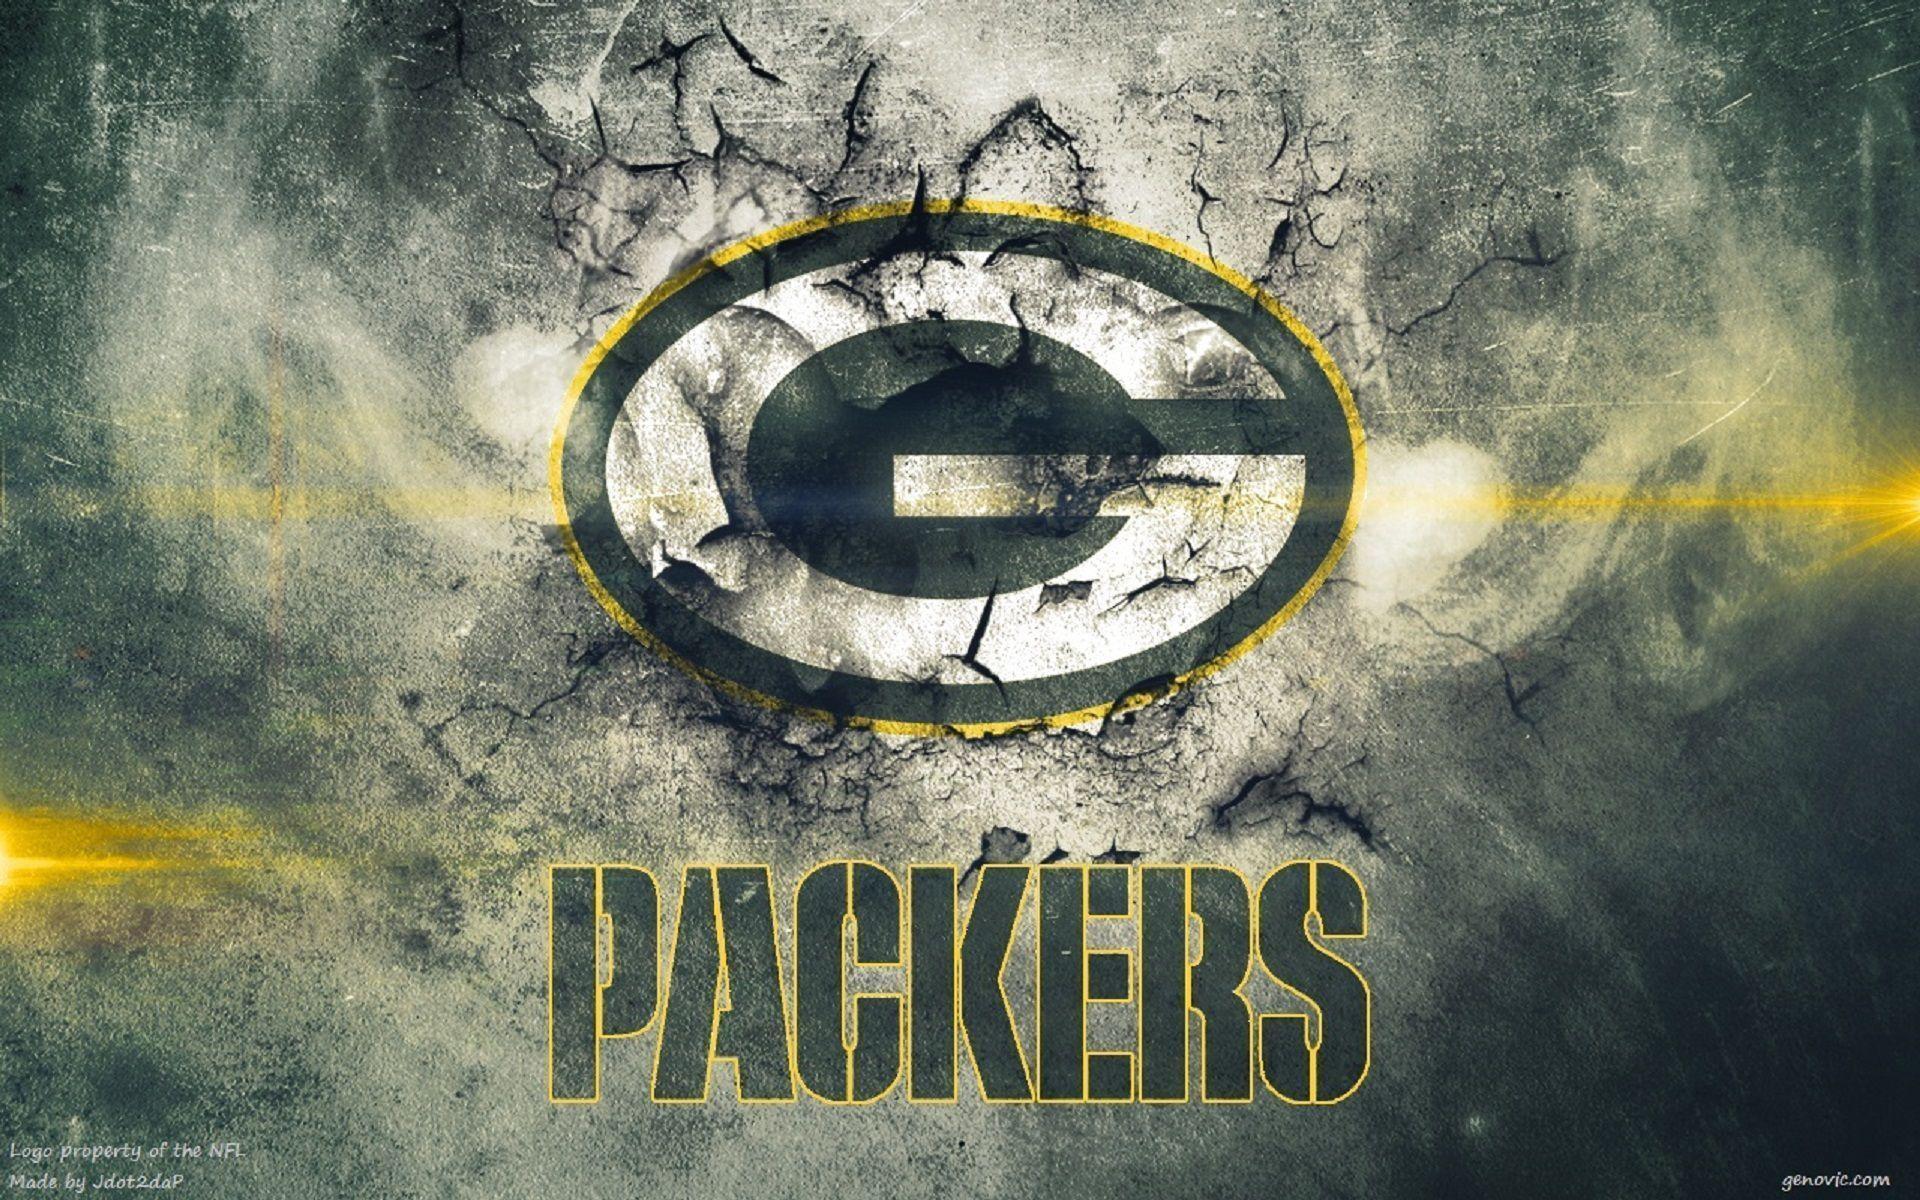 Green Bay Packers Wallpaper background picture